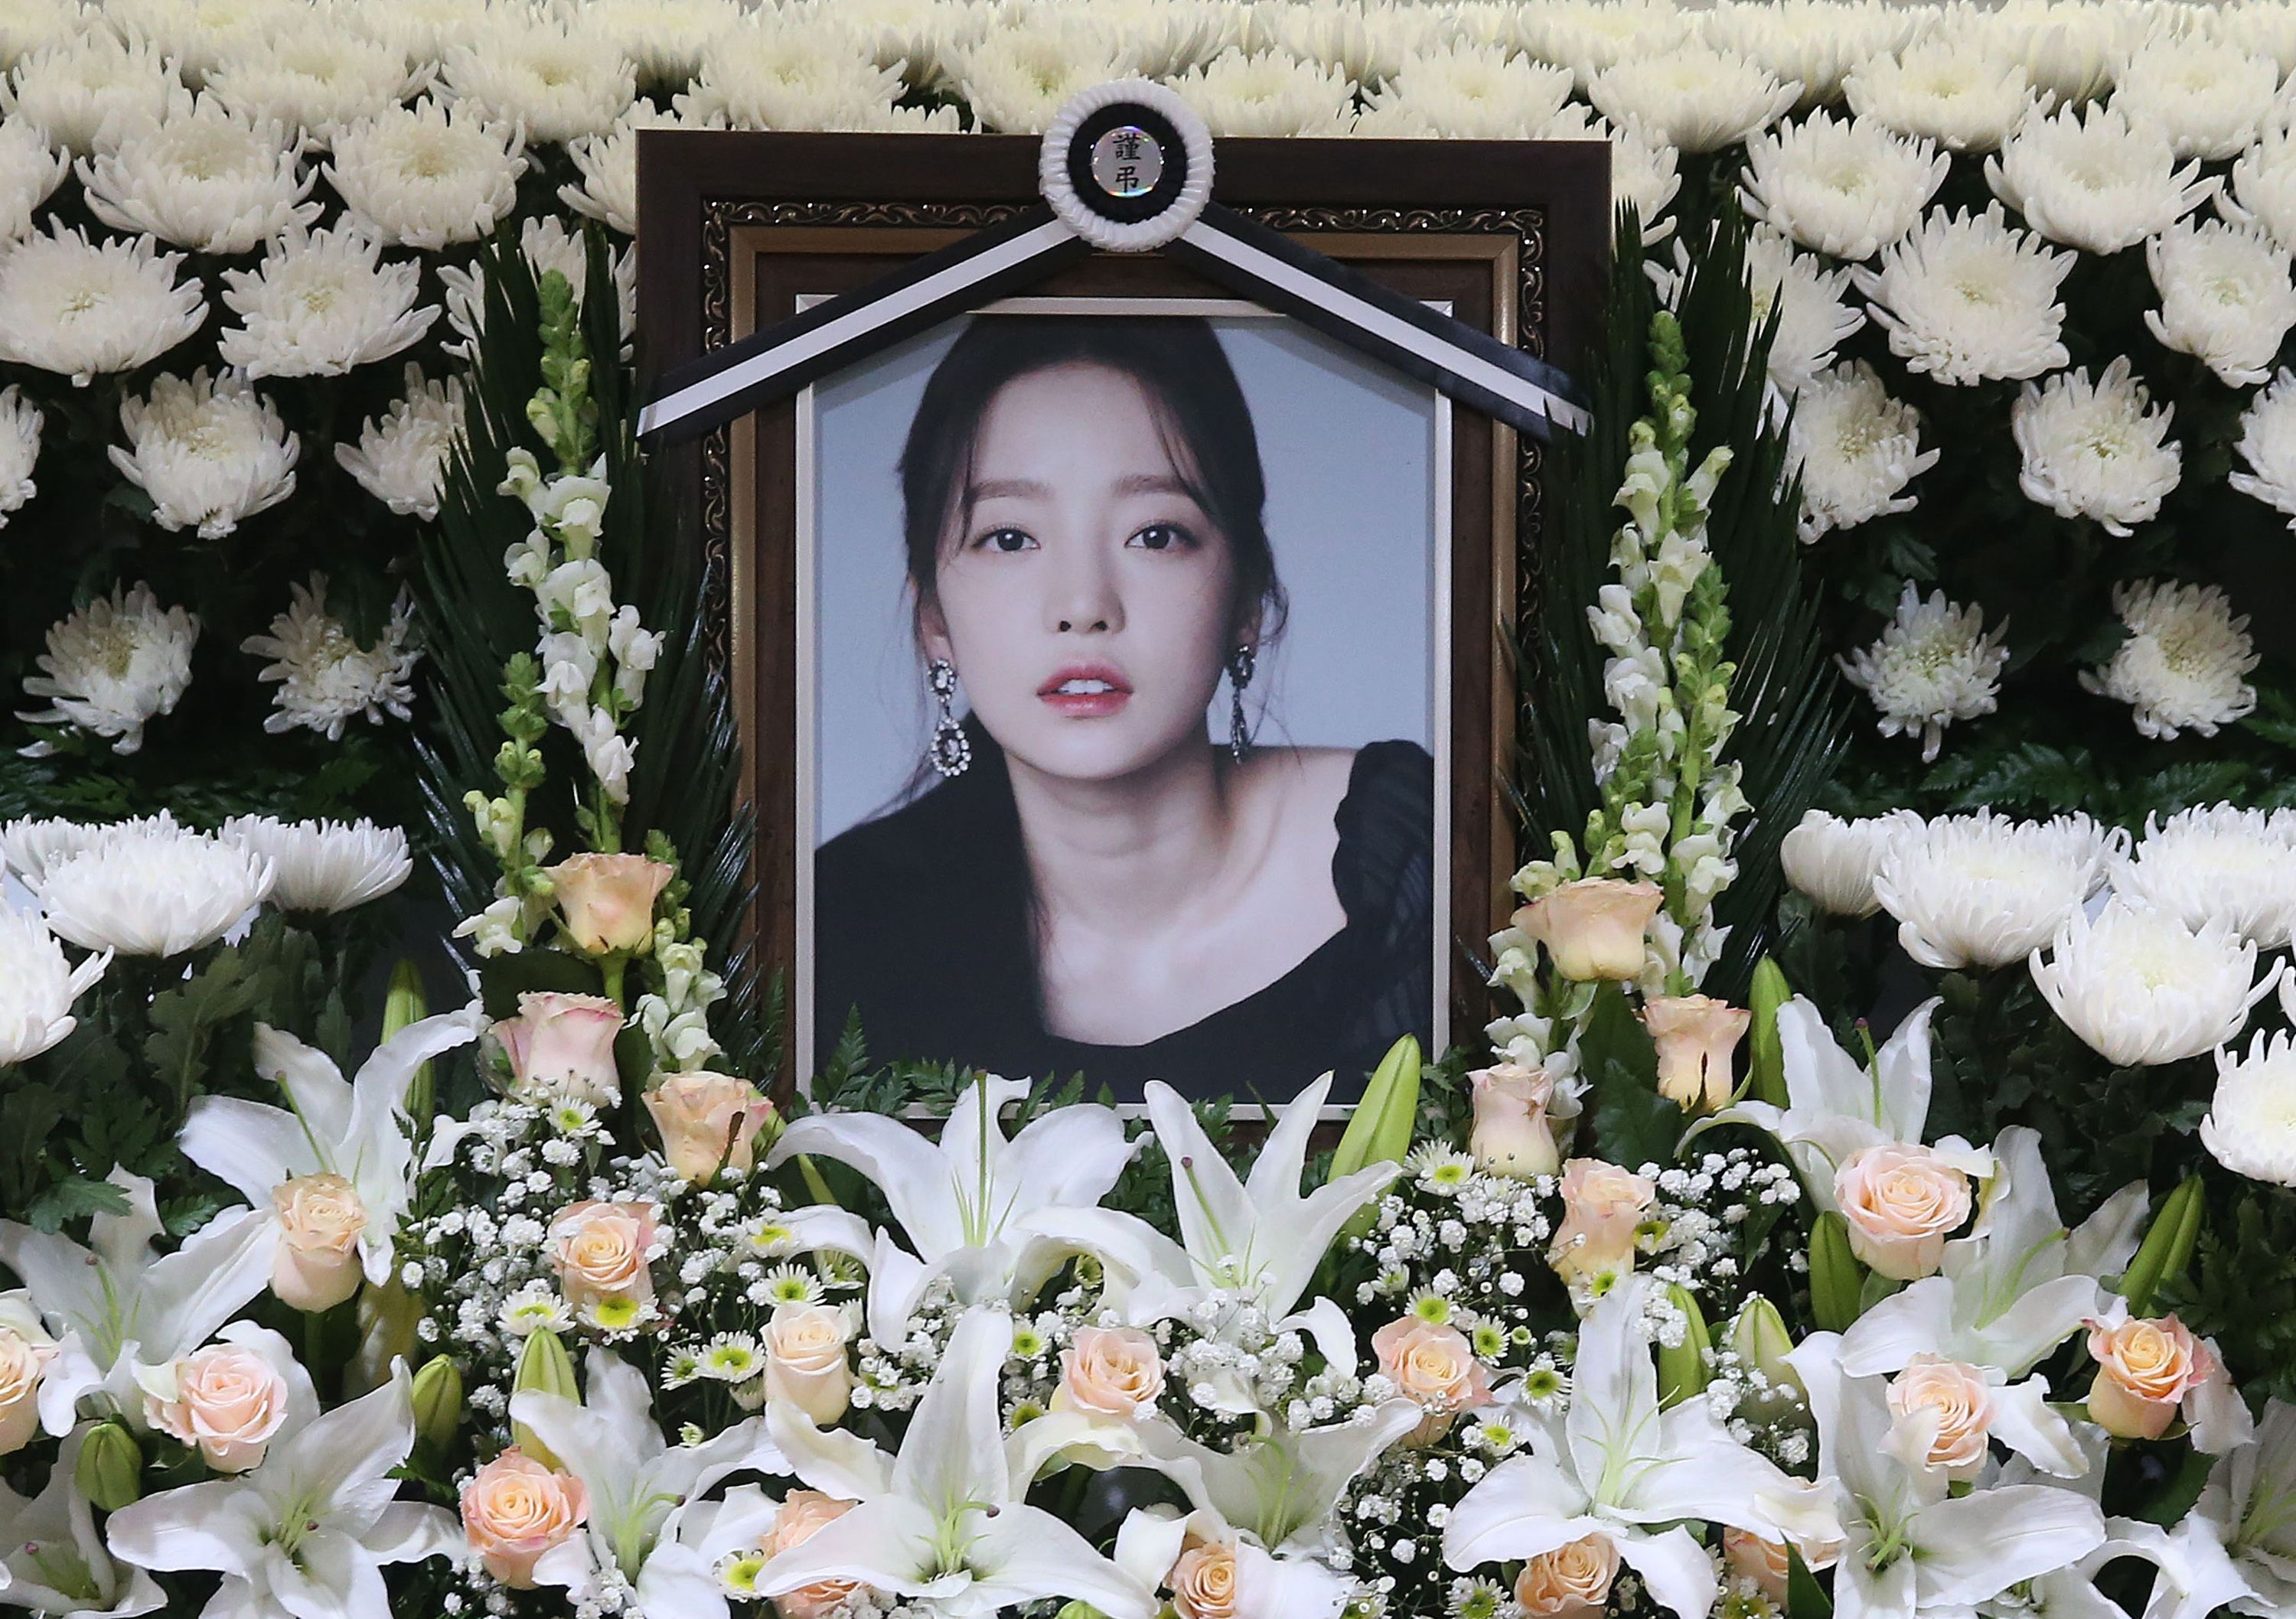 A portrait of late K-pop star Goo Hara is seen at a memorial altar at a hospital in Seoul on November 25. Photo: STR/Dong-A Ilbo/AFP